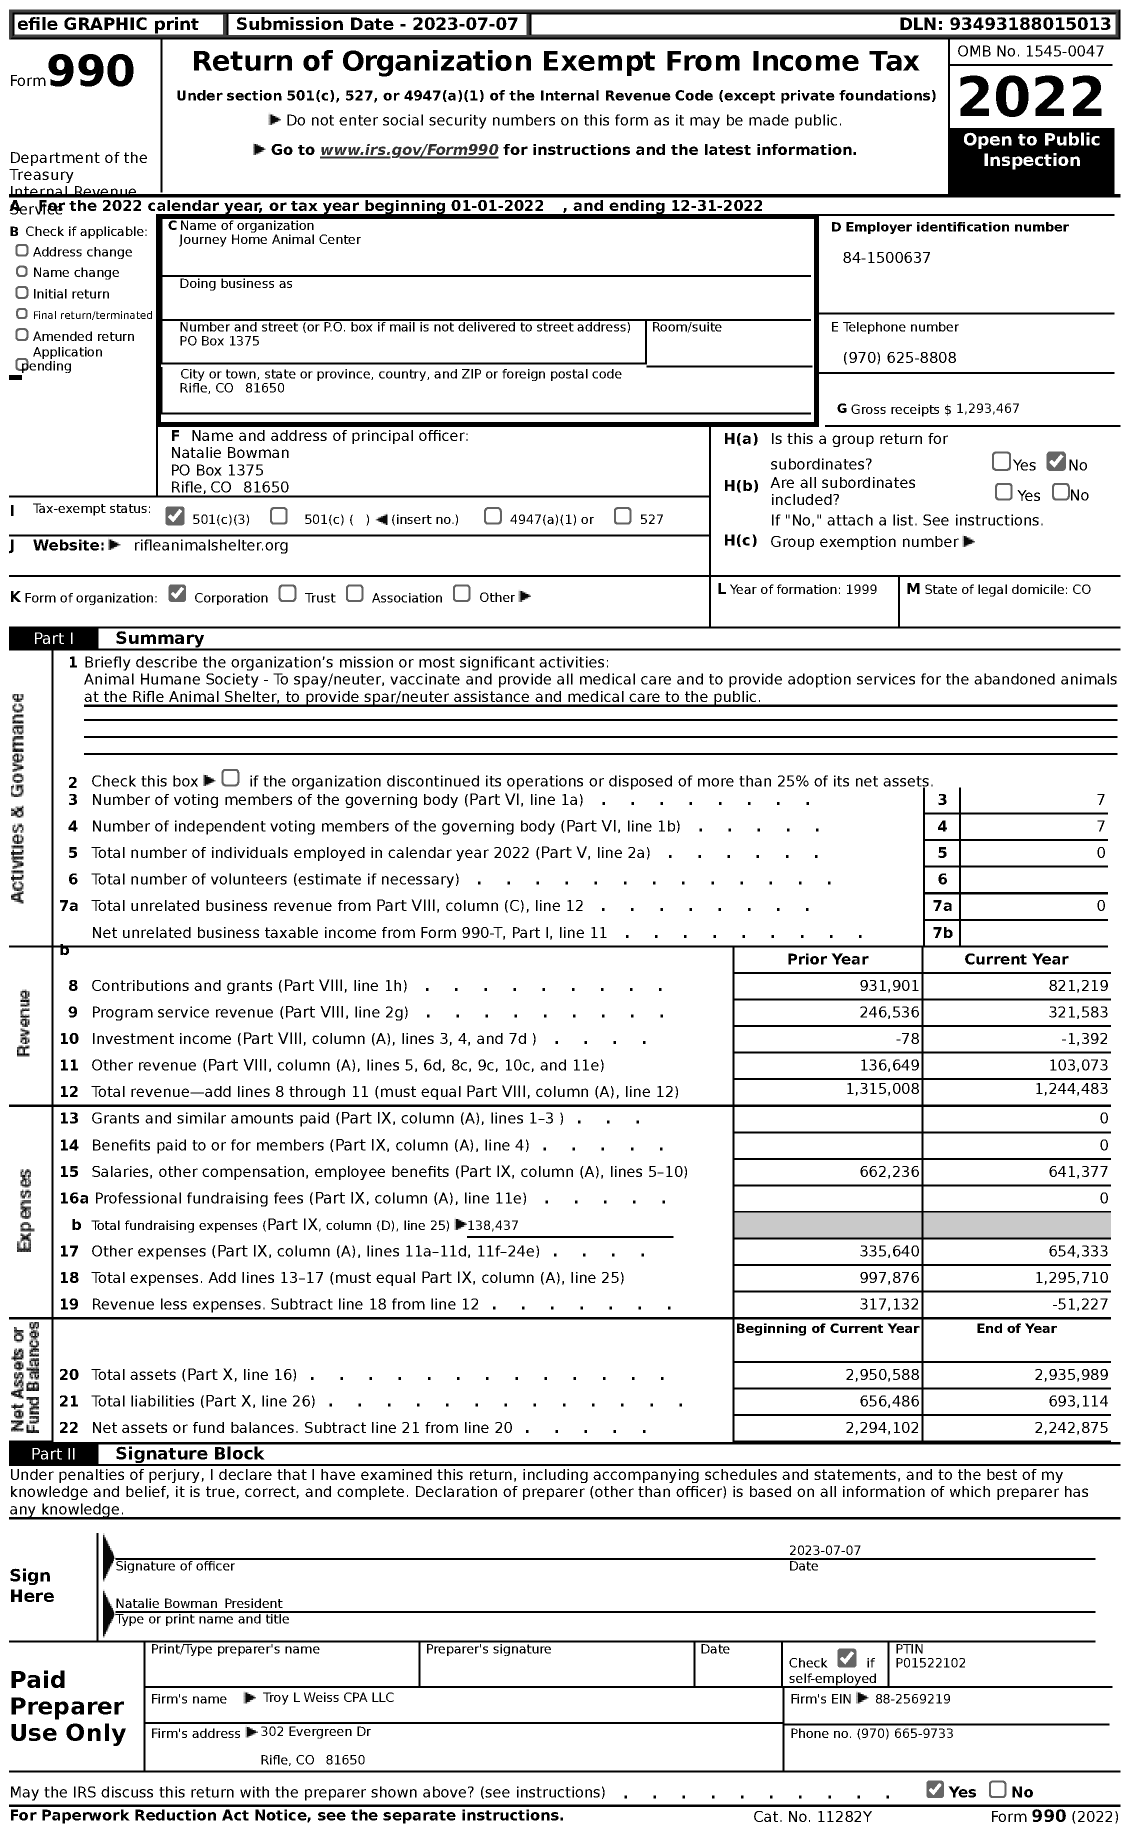 Image of first page of 2022 Form 990 for Journey Home Animal Center